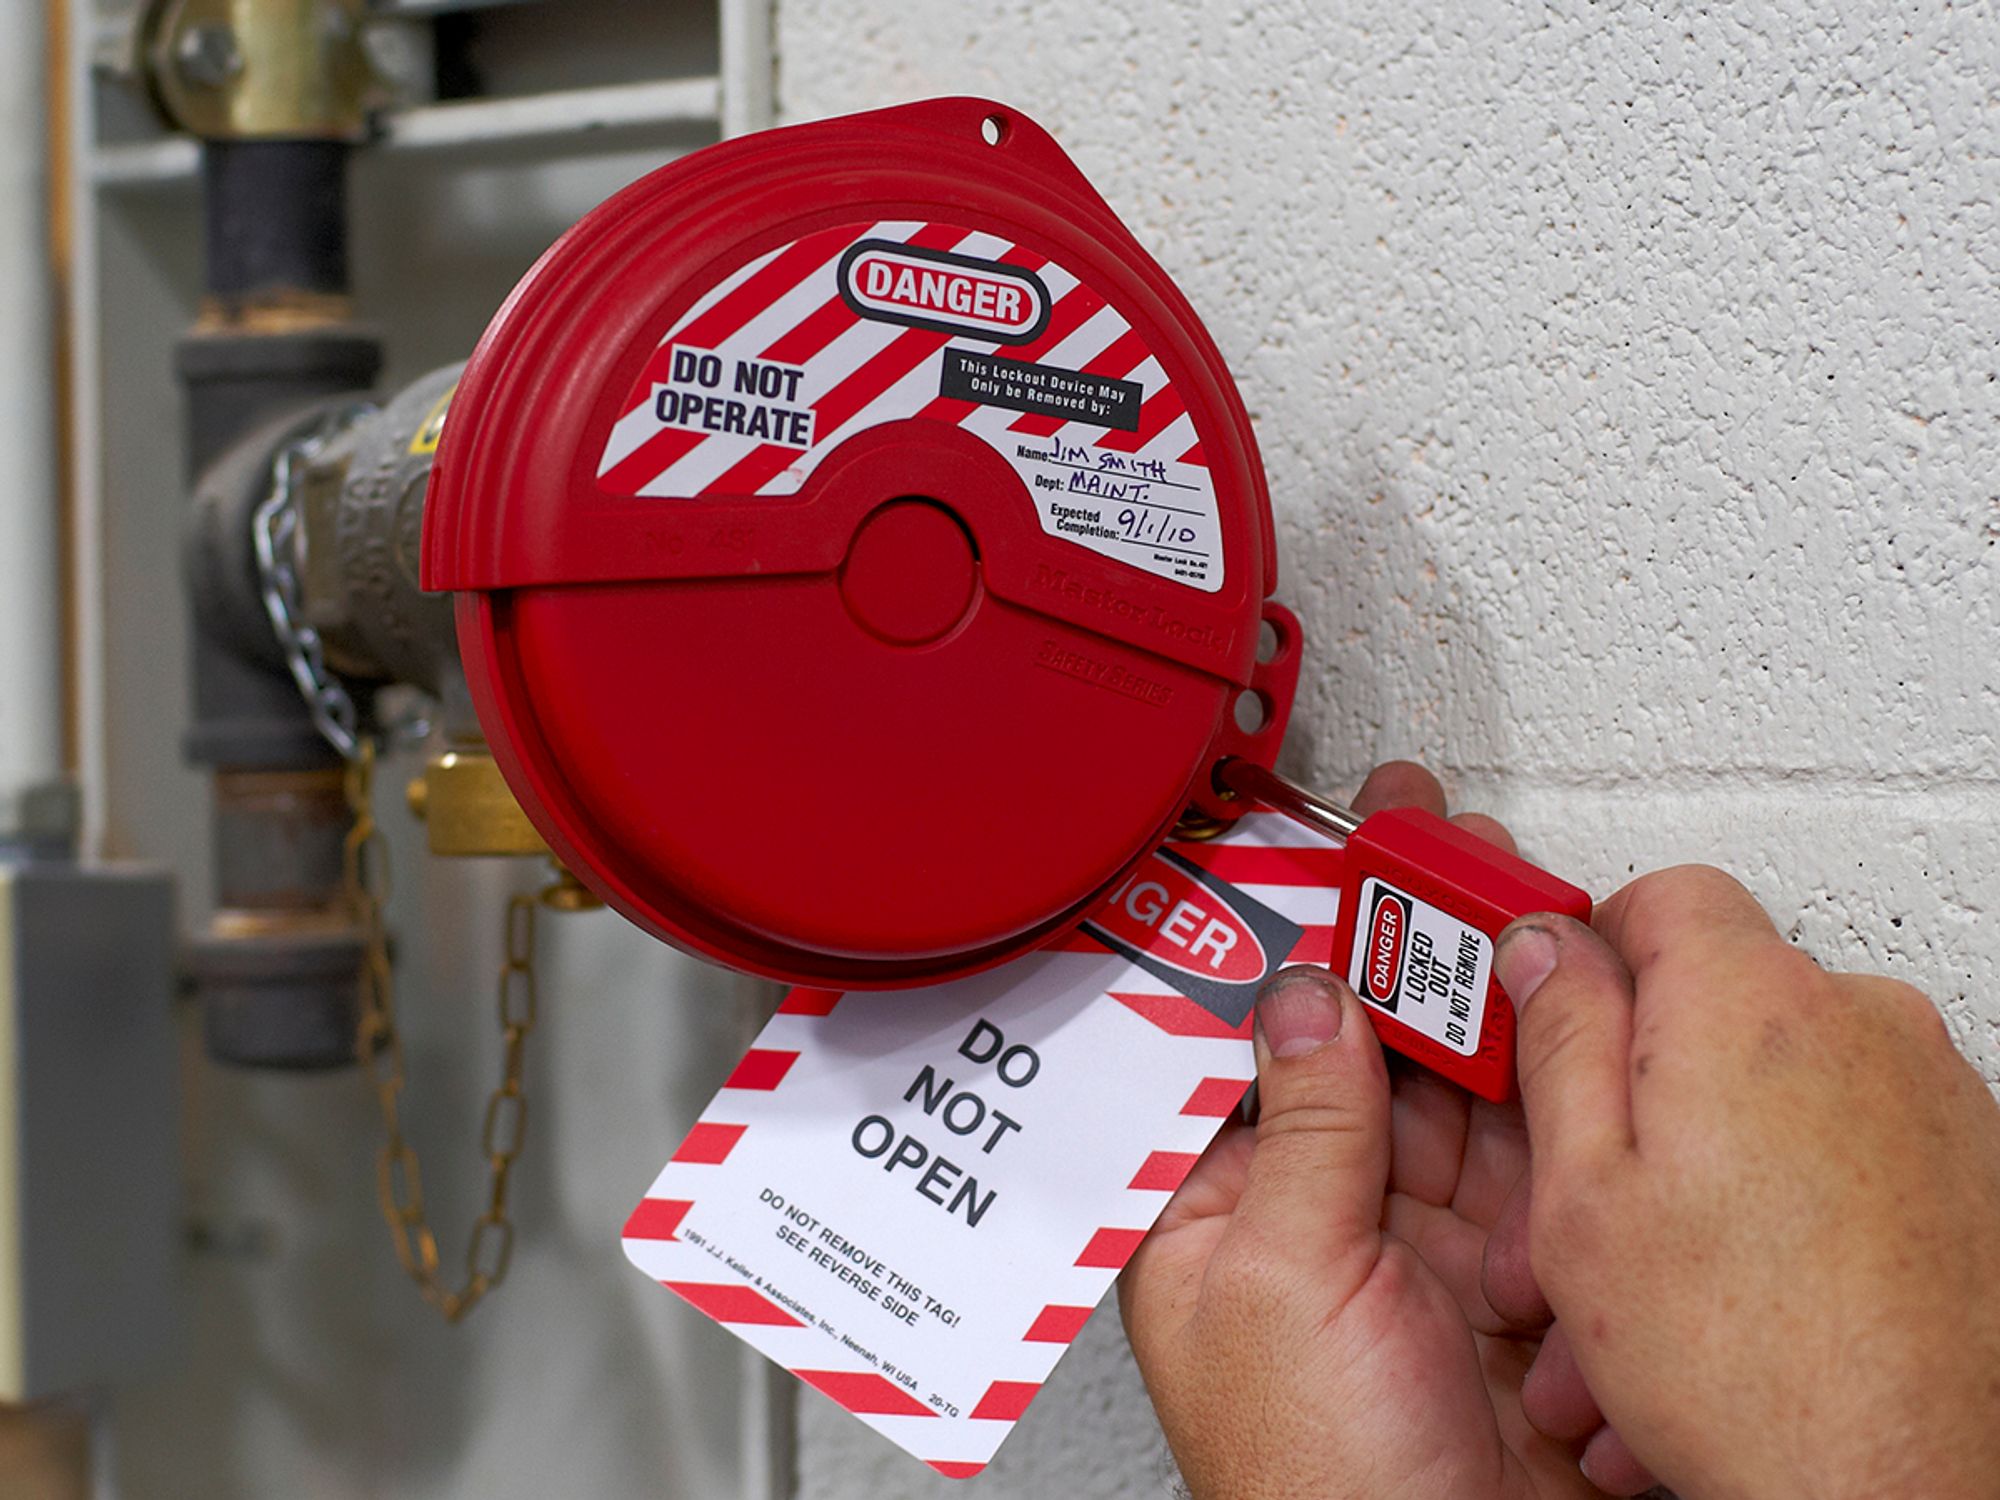 Lockout and tagout